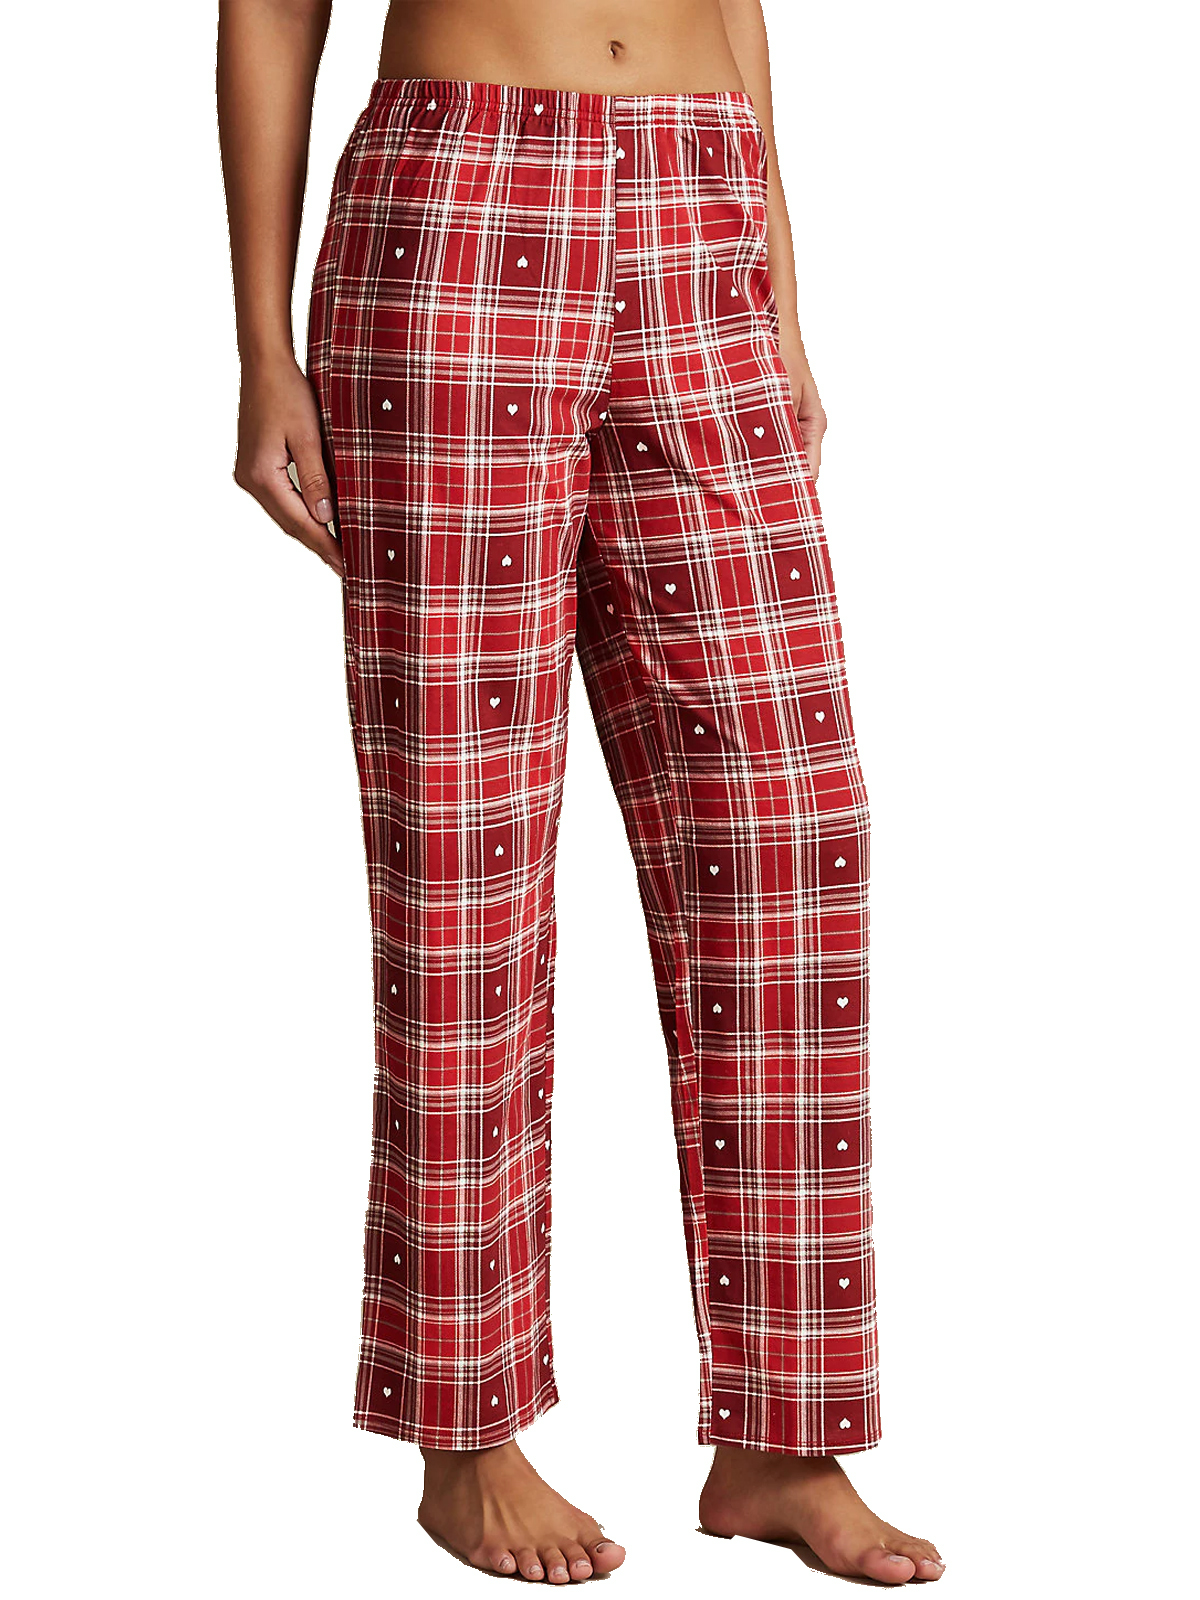 Marks and Spencer - - M&5 RED Pure Cotton Long Sleeve Pyjama Set - Size ...